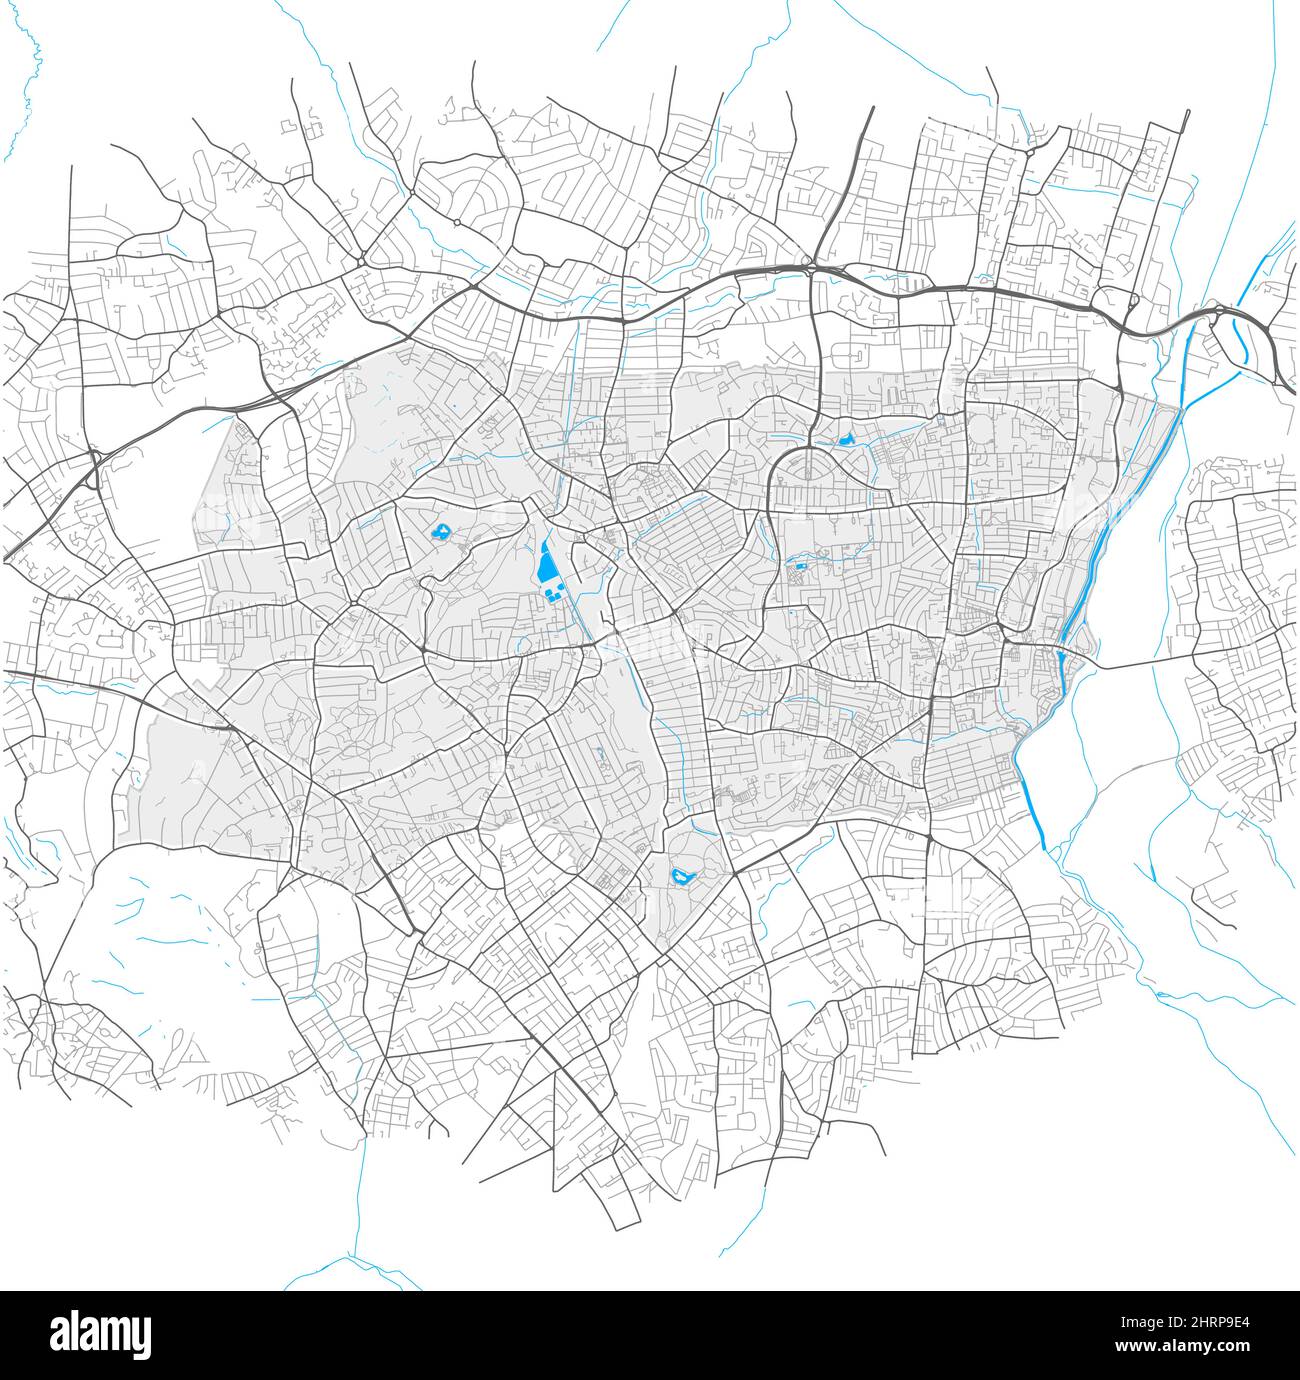 Haringey, Greater London, United Kingdom, high detail vector map with city boundaries and editable paths. White outlines for main roads. Many smaller Stock Vector